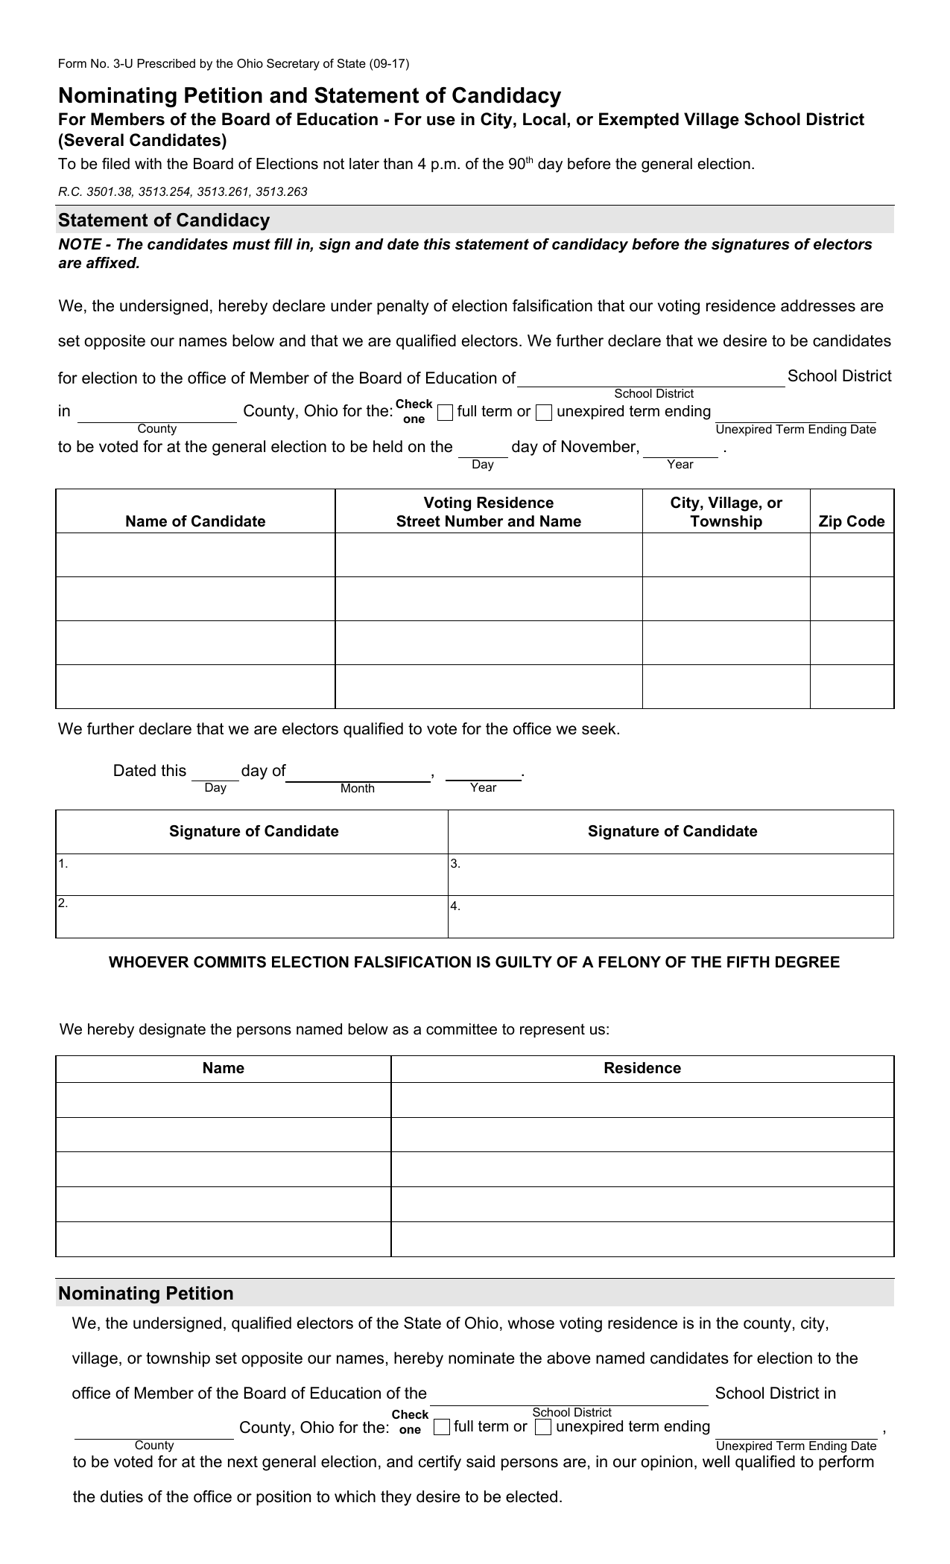 Form 3-U Nominating Petition and Statement of Candidacy for Members of the Board of Education - for Use in City, Local, or Exempted Village School District (Several Candidates) - Ohio, Page 1